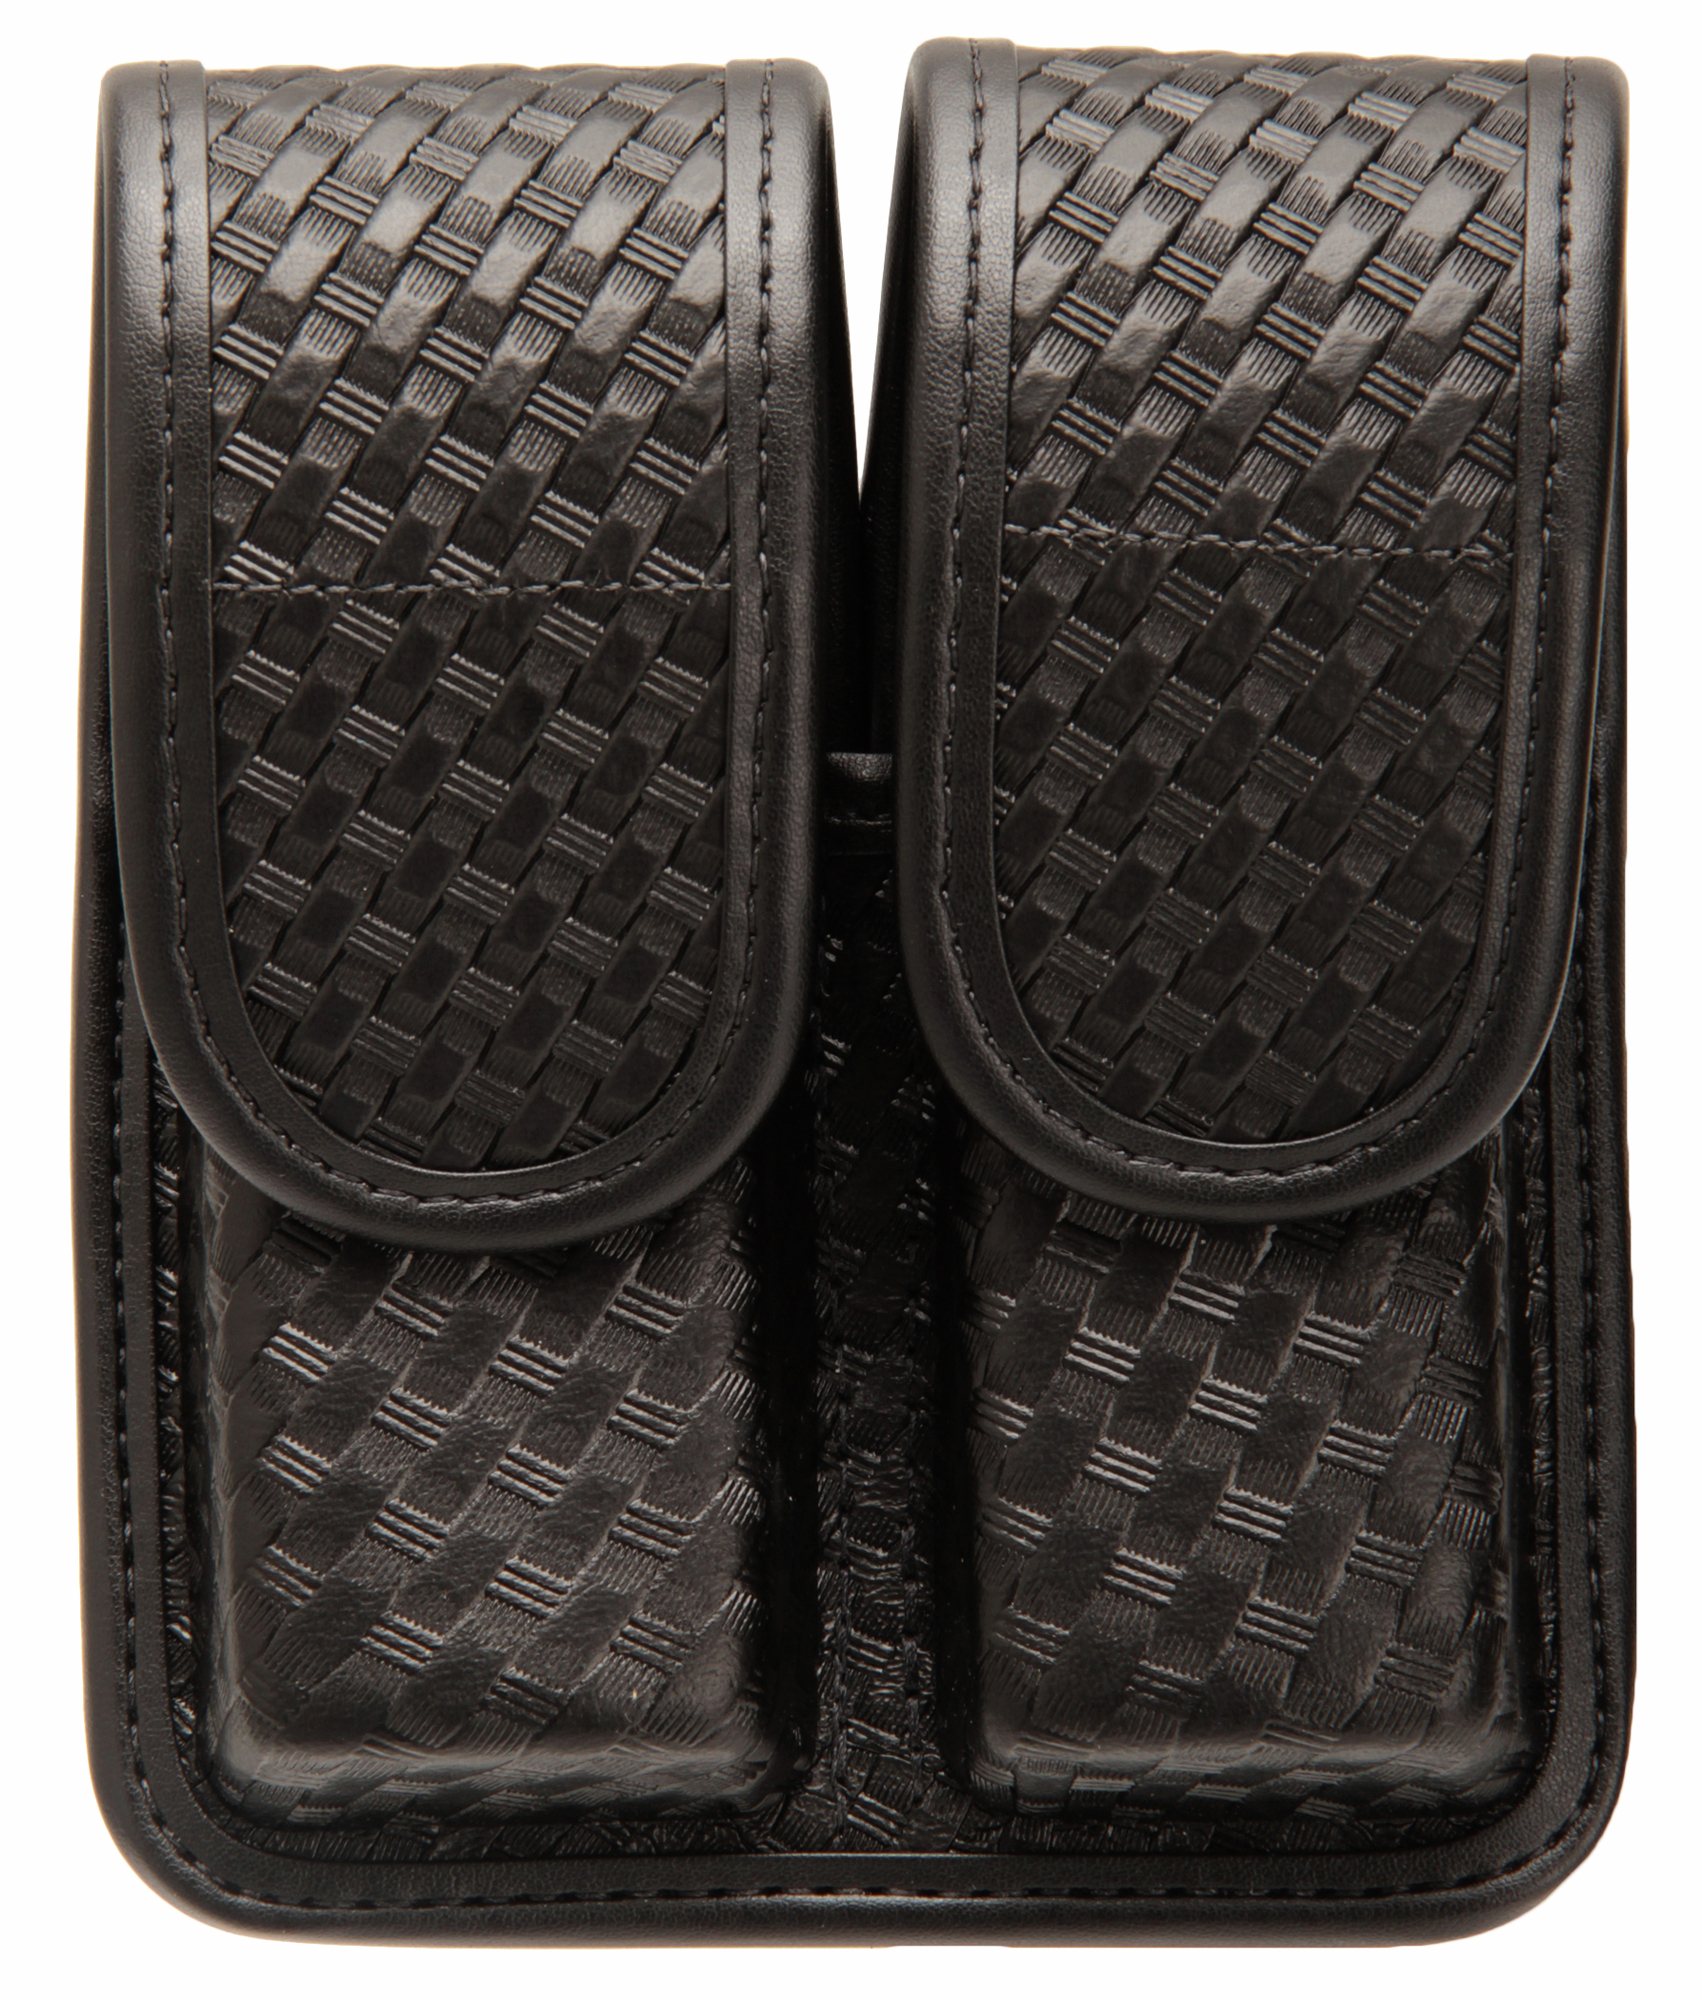 New Black Leather Basket Weave Double Magazine Pouch For Sig P220 